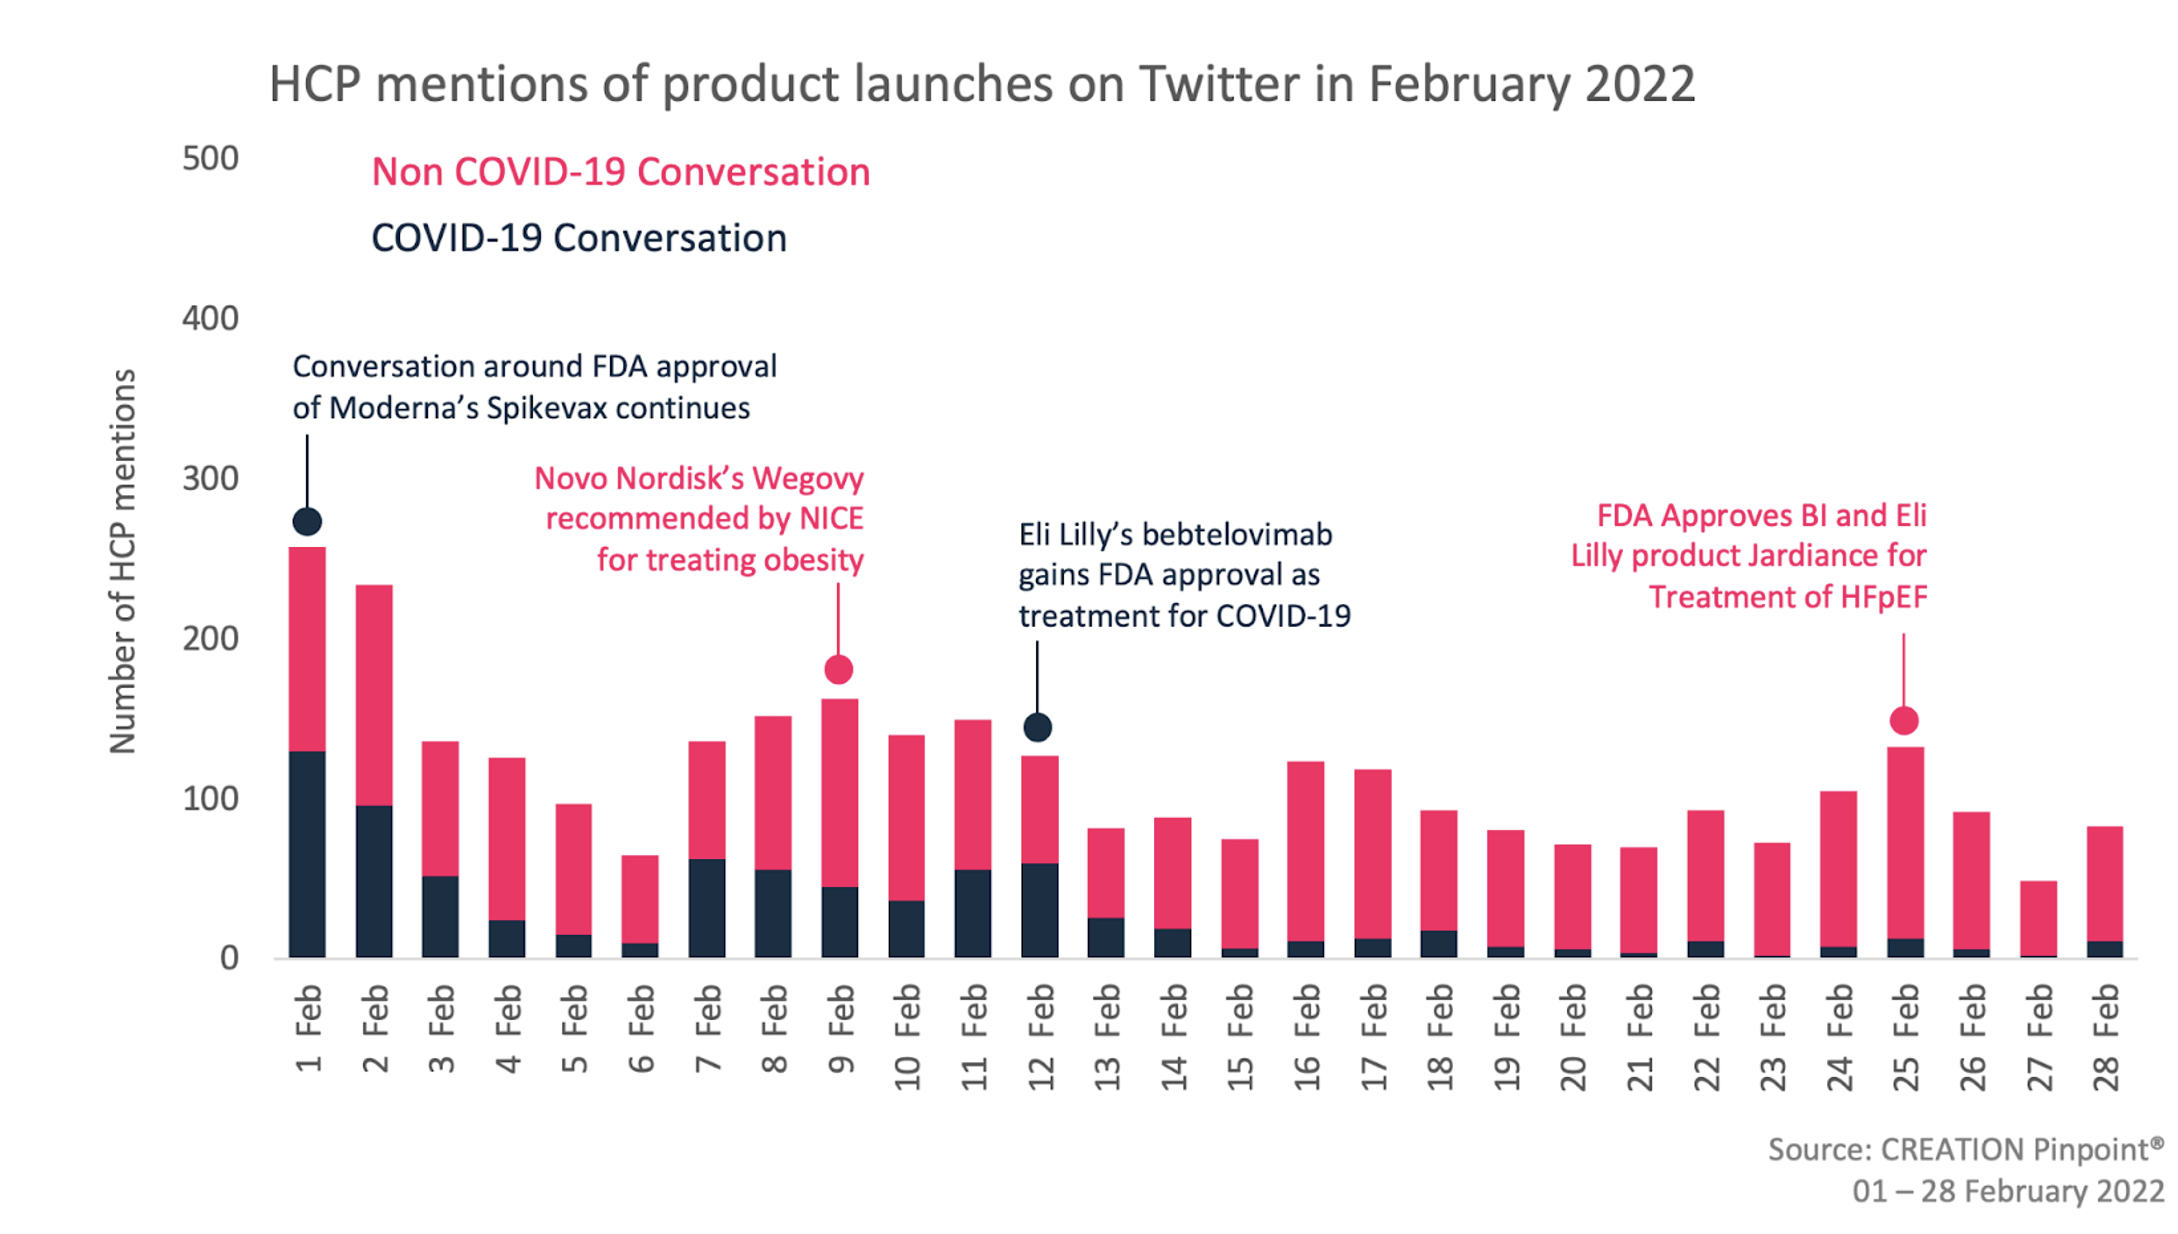 Graph showing HCP mentions of product launches on Twitter